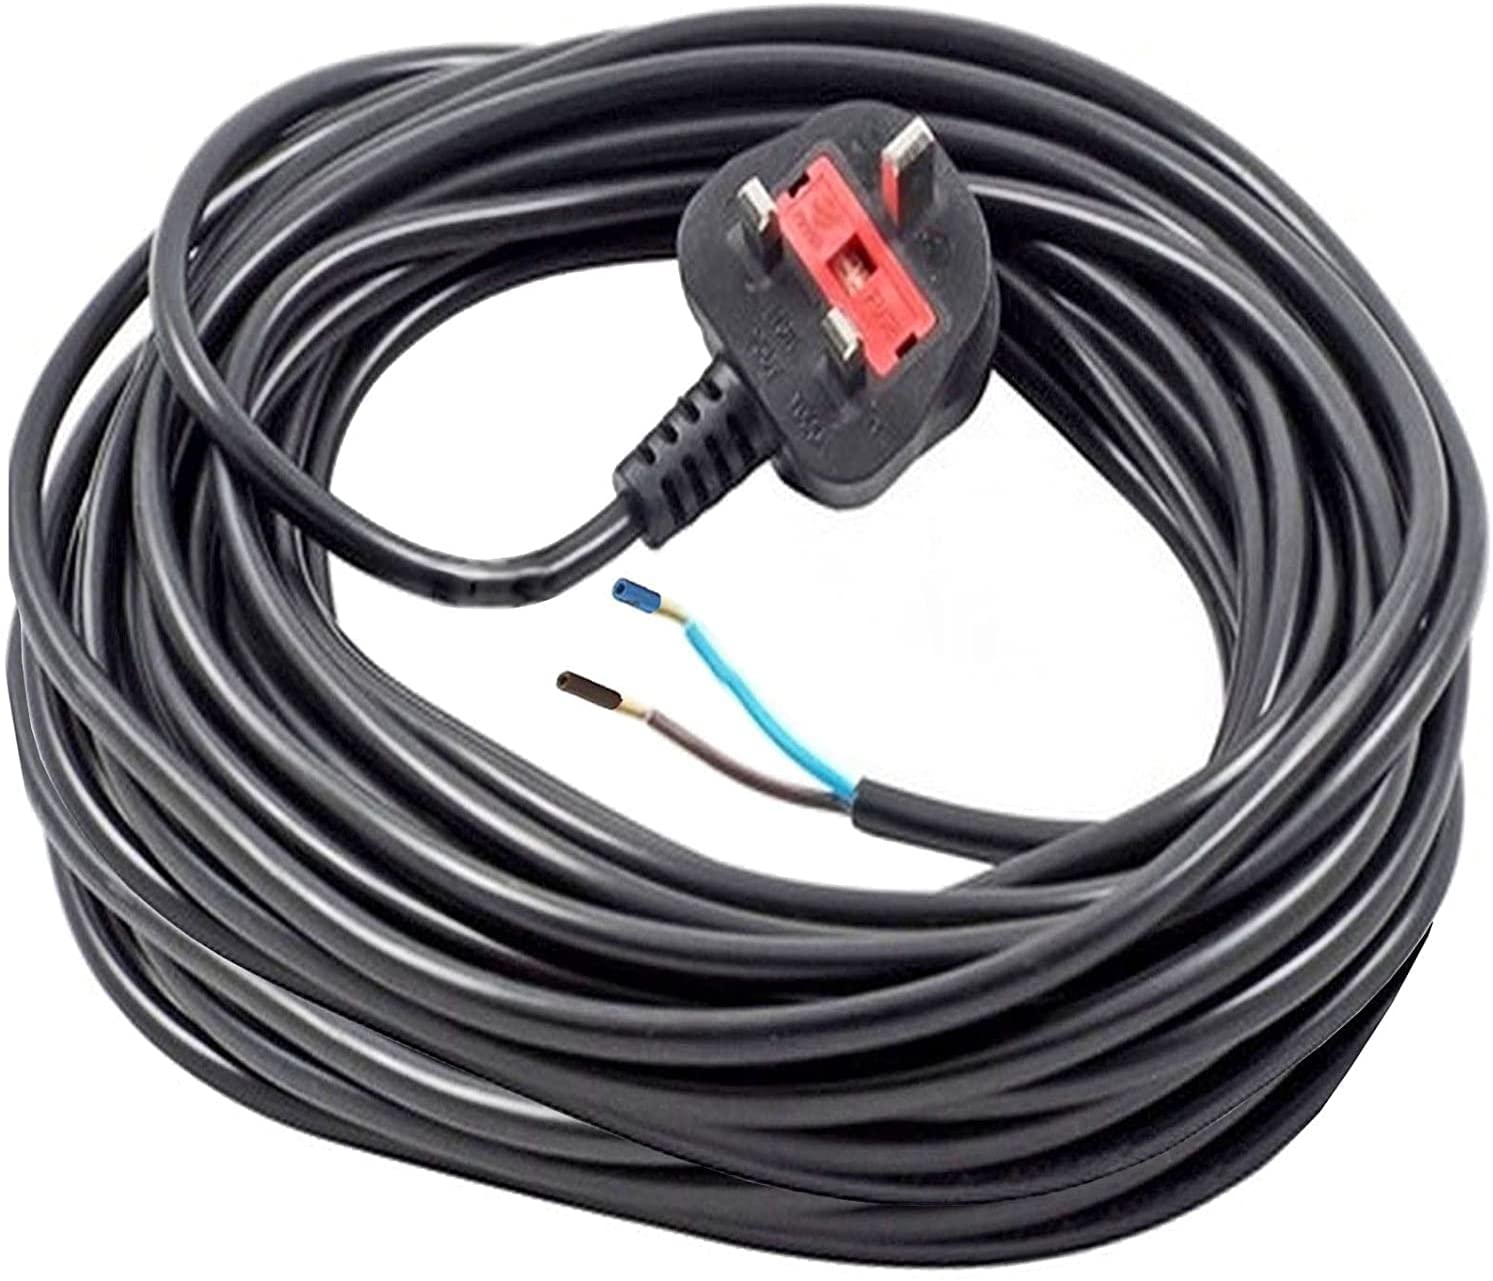 XL Extra Long 12M Metre Black Cable Mains Power Lead for SEBO Vacuum Cleaner (UK Plug)